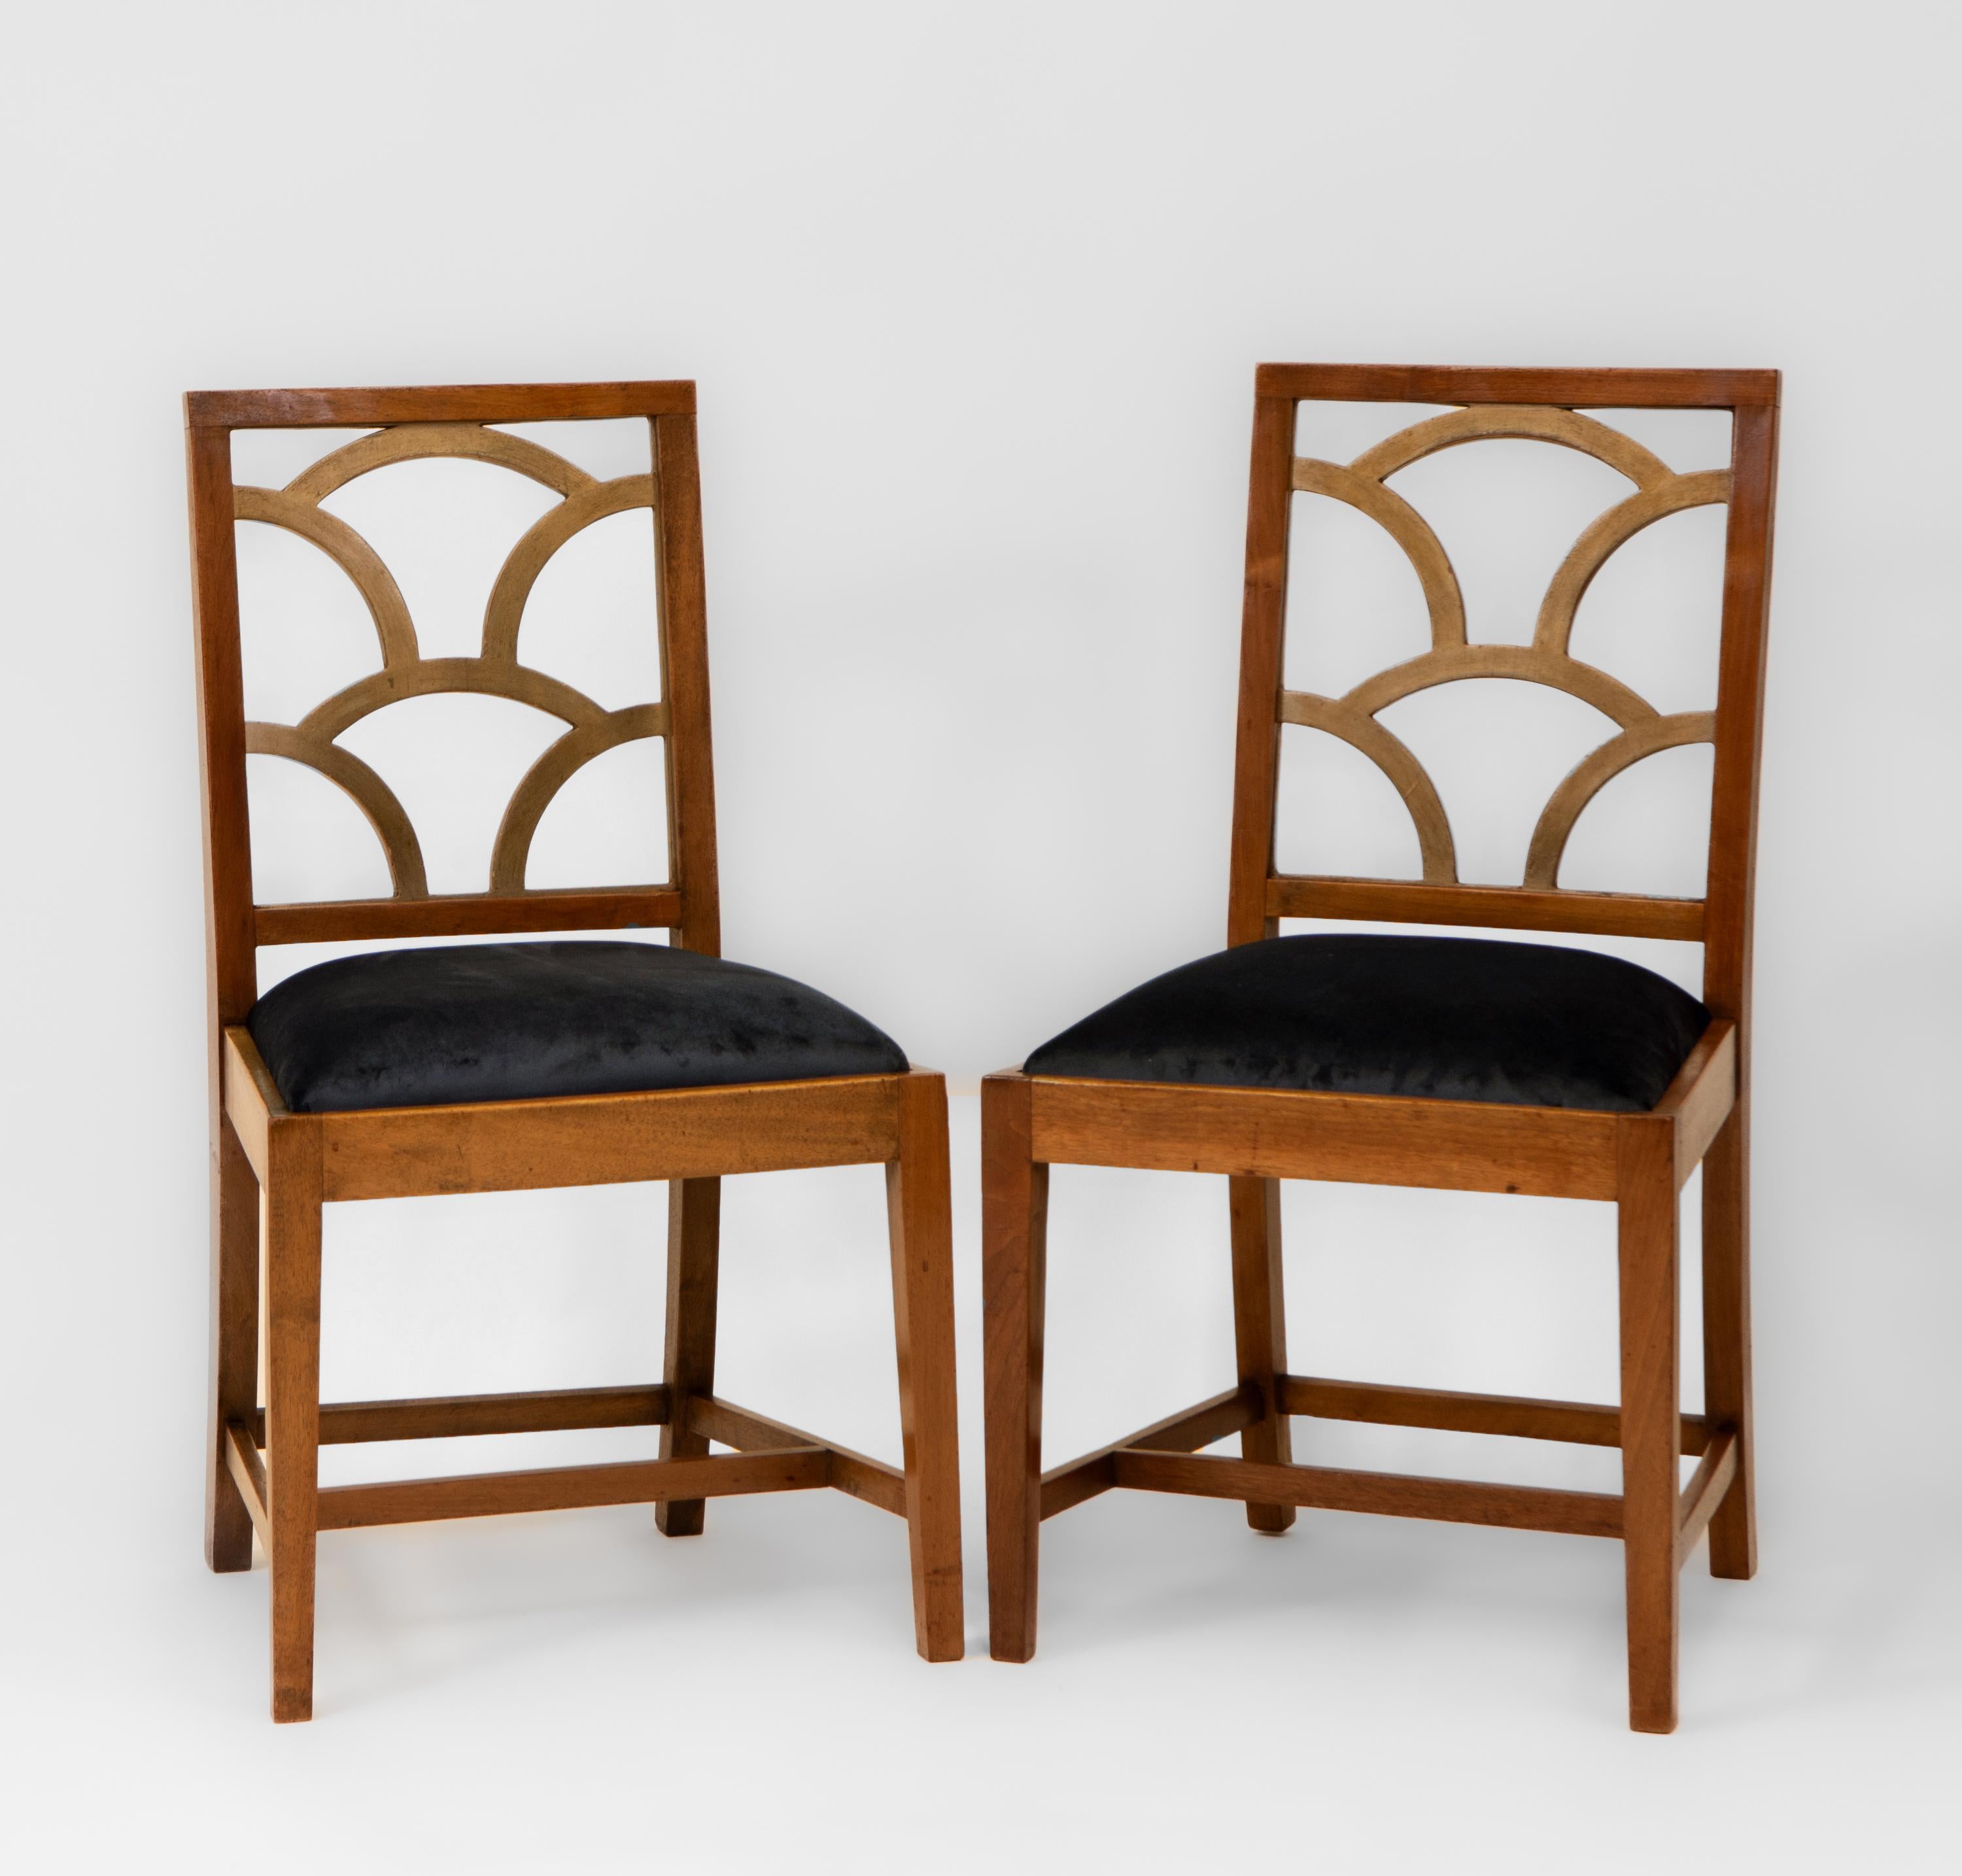 Rowley Gallery Art Deco Pair Of  Walnut Cloud Form Back Side Chairs 1930's For Sale 3